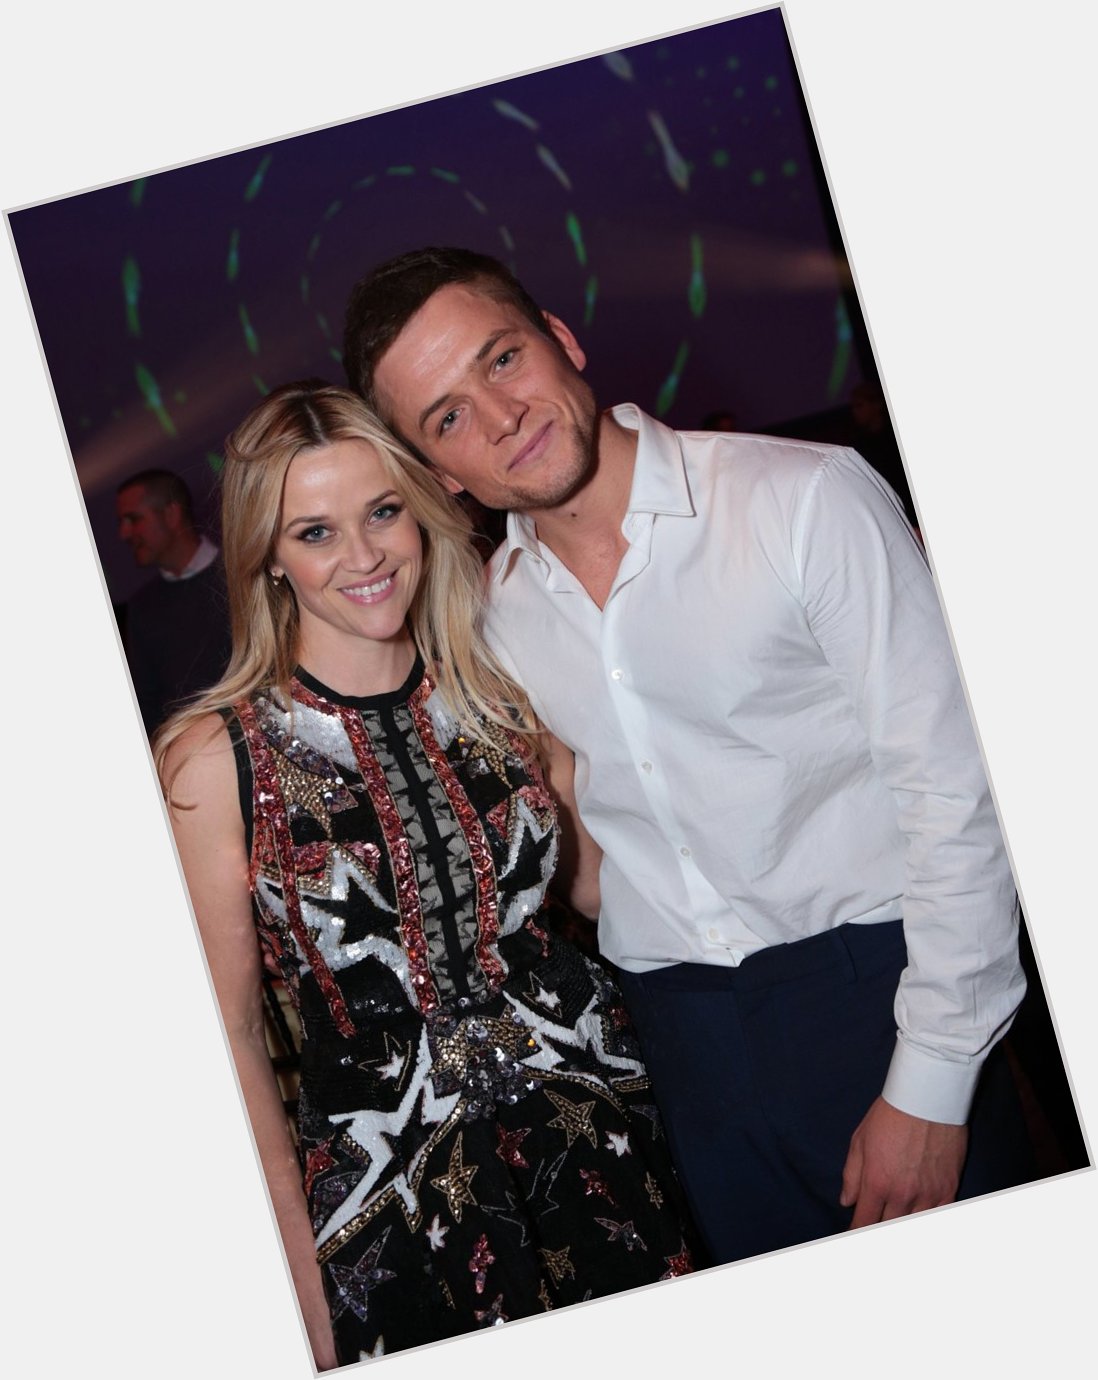  Taron Egerton Co-star Appreciation Post and a very happy birthday to Reese Witherspoon!    